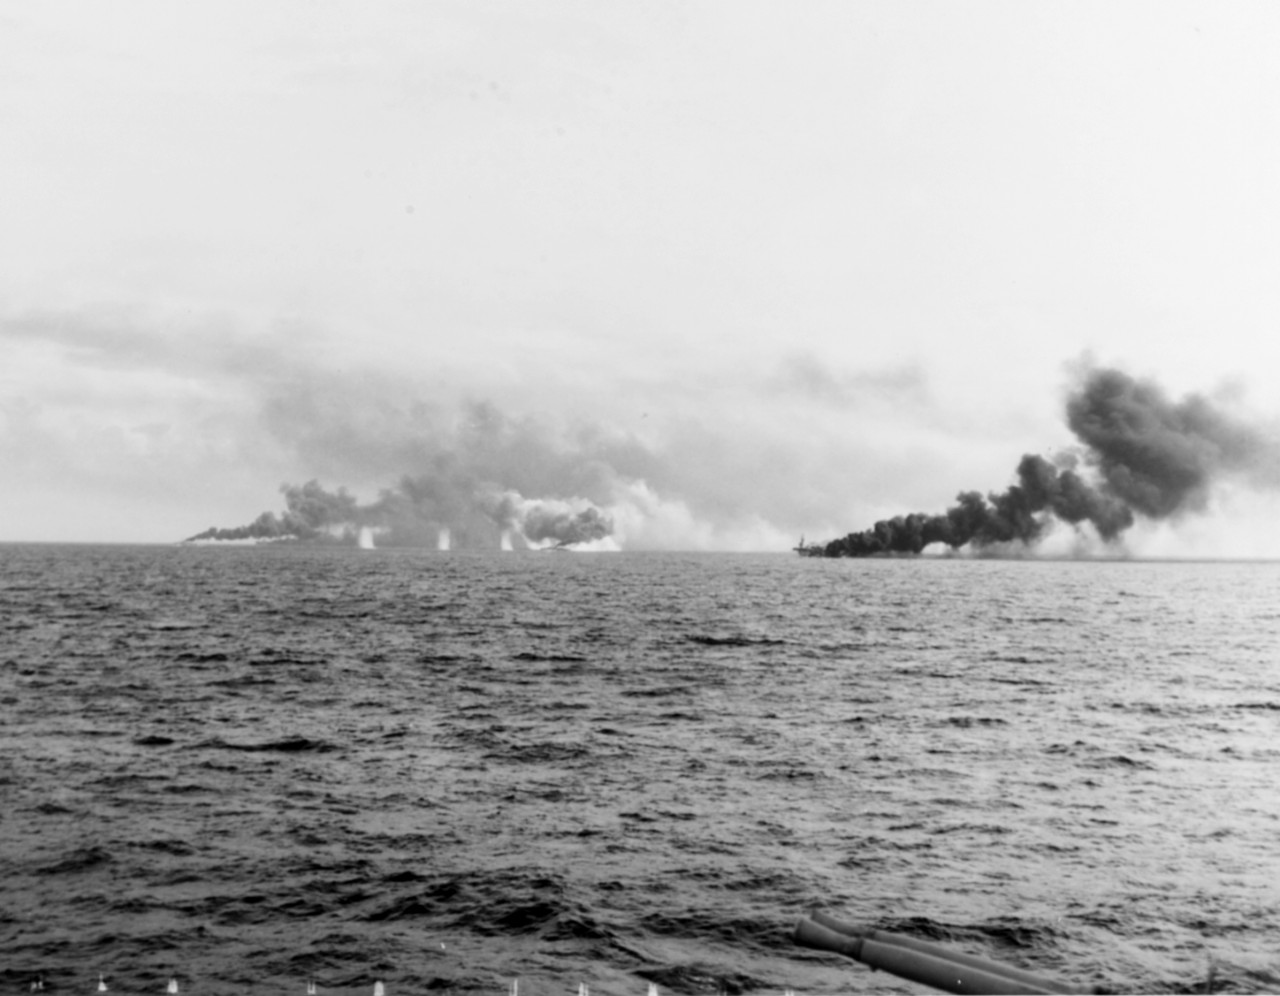 Ships of Carrier Division 25 under fire during the Battle off Samar, 25 October 1944. Photographed from USS White Plains.